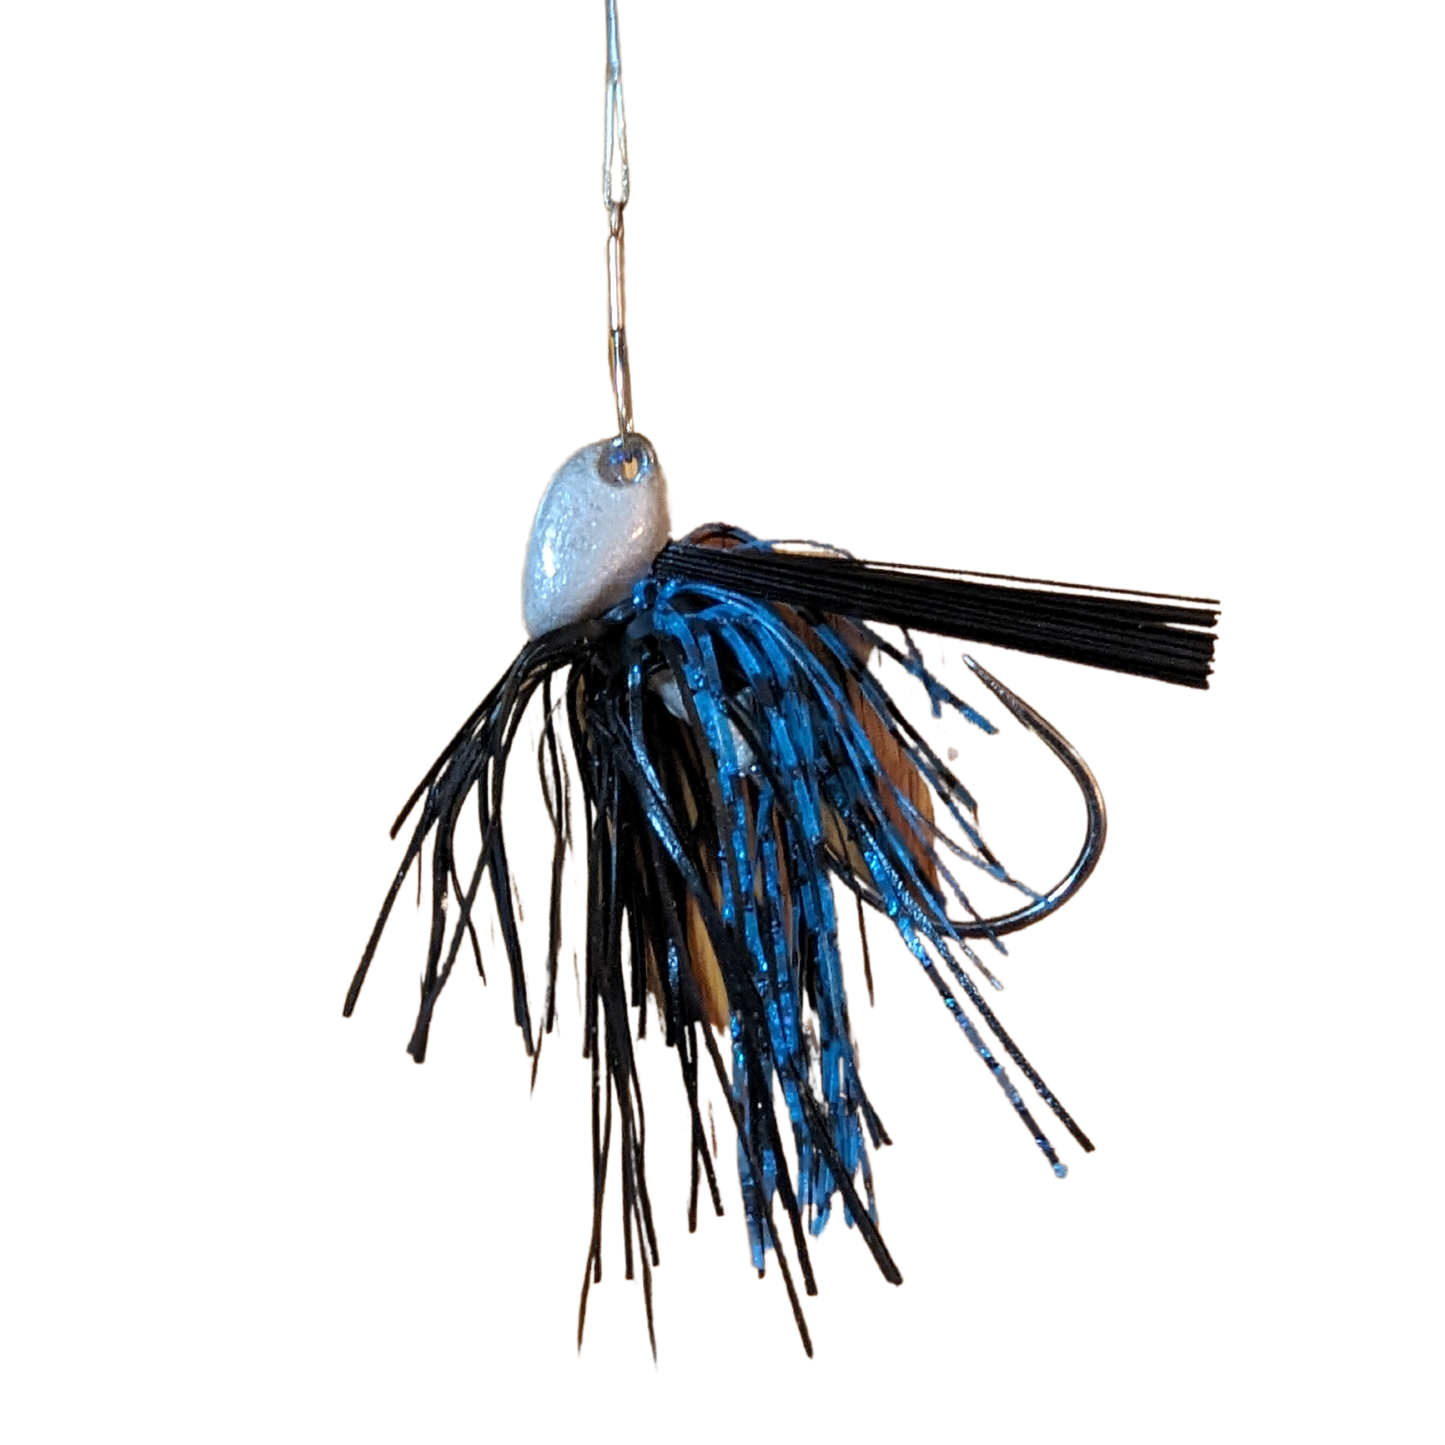 Black and blue weedless lead free jig for bass fishing